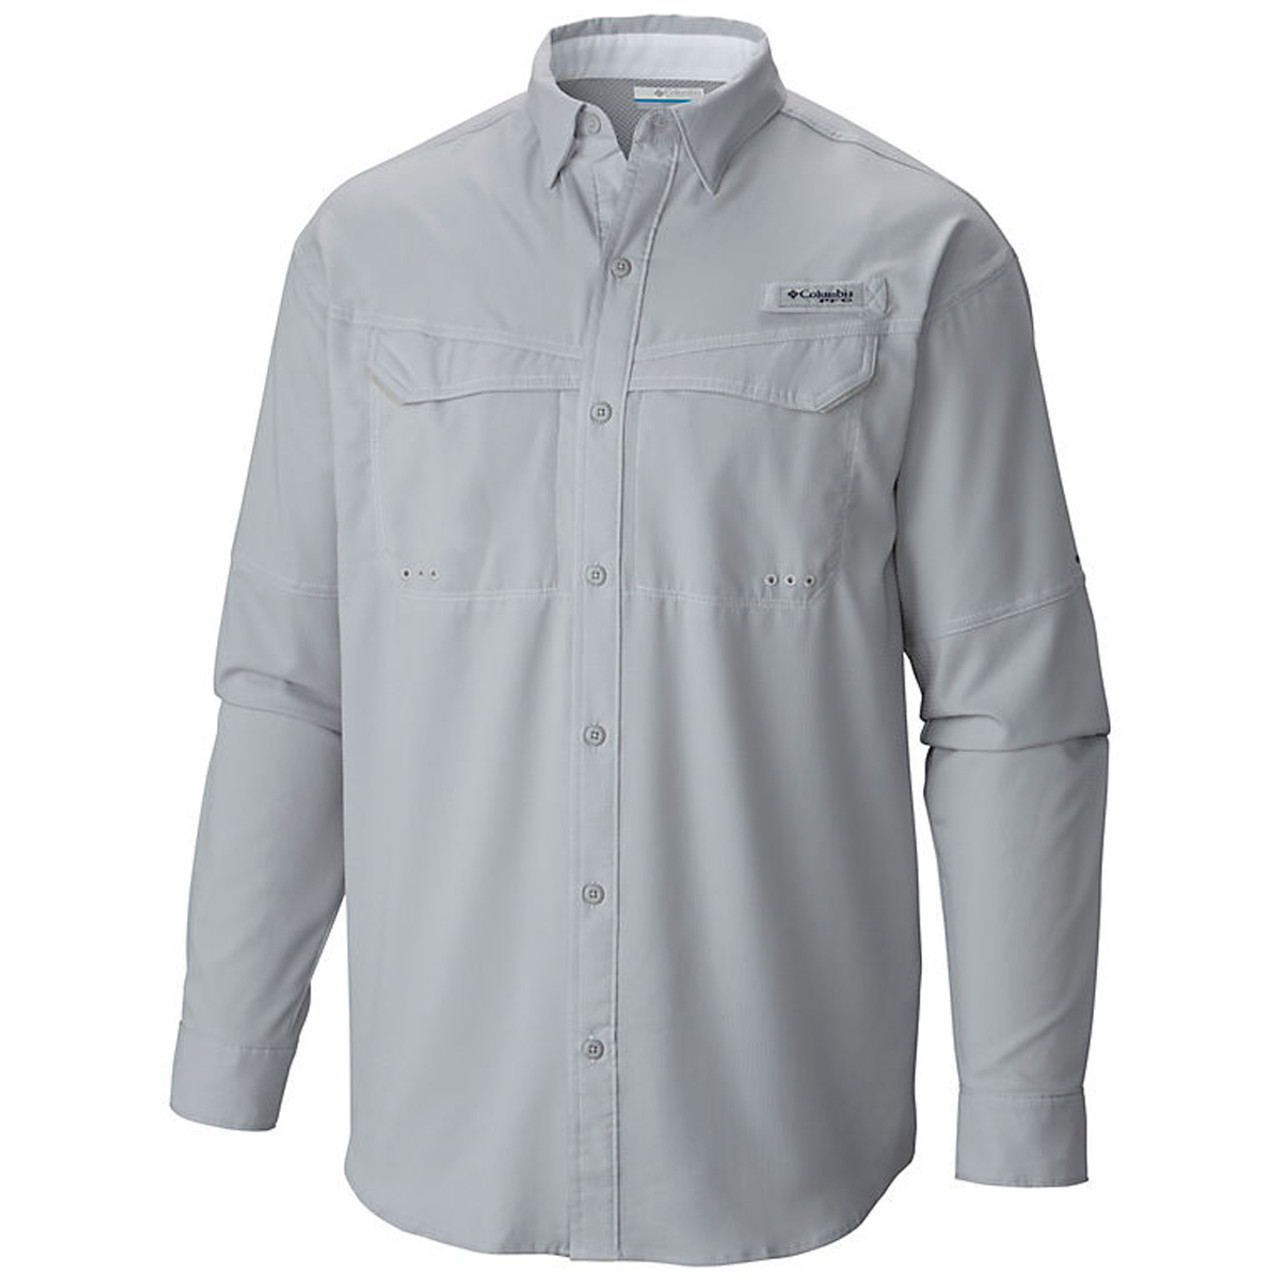 Columbia Men's Big and Tall Low Drag Offshore Long Sleeve Shirt, White, 4X  price in UAE,  UAE